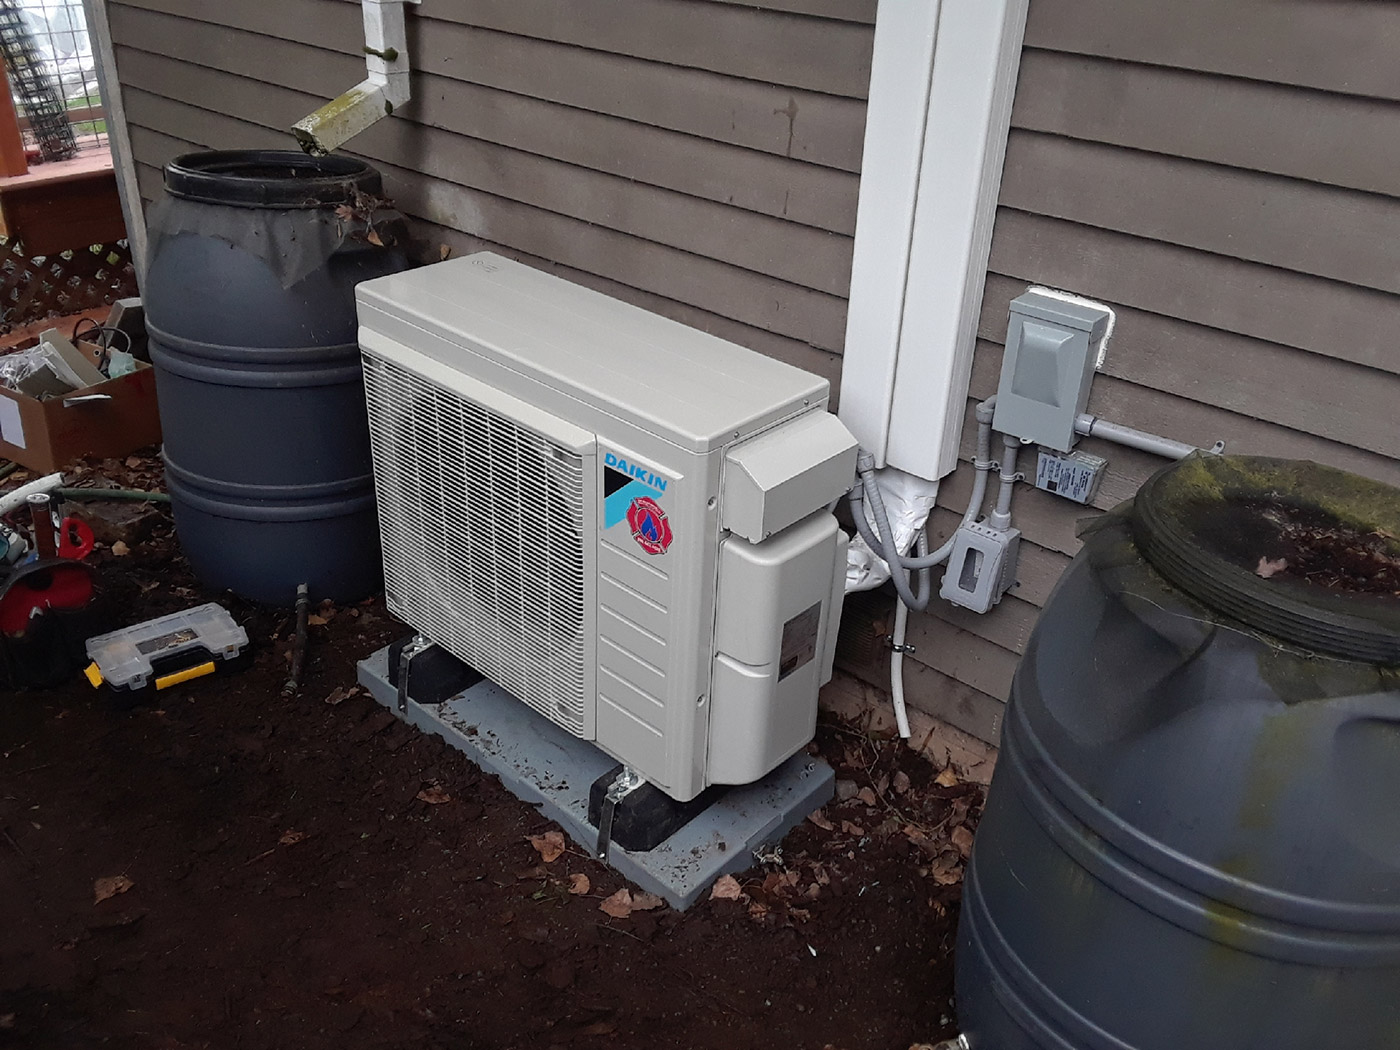 Clawson ODU, 1st Response Heating &amp; Air Solutions